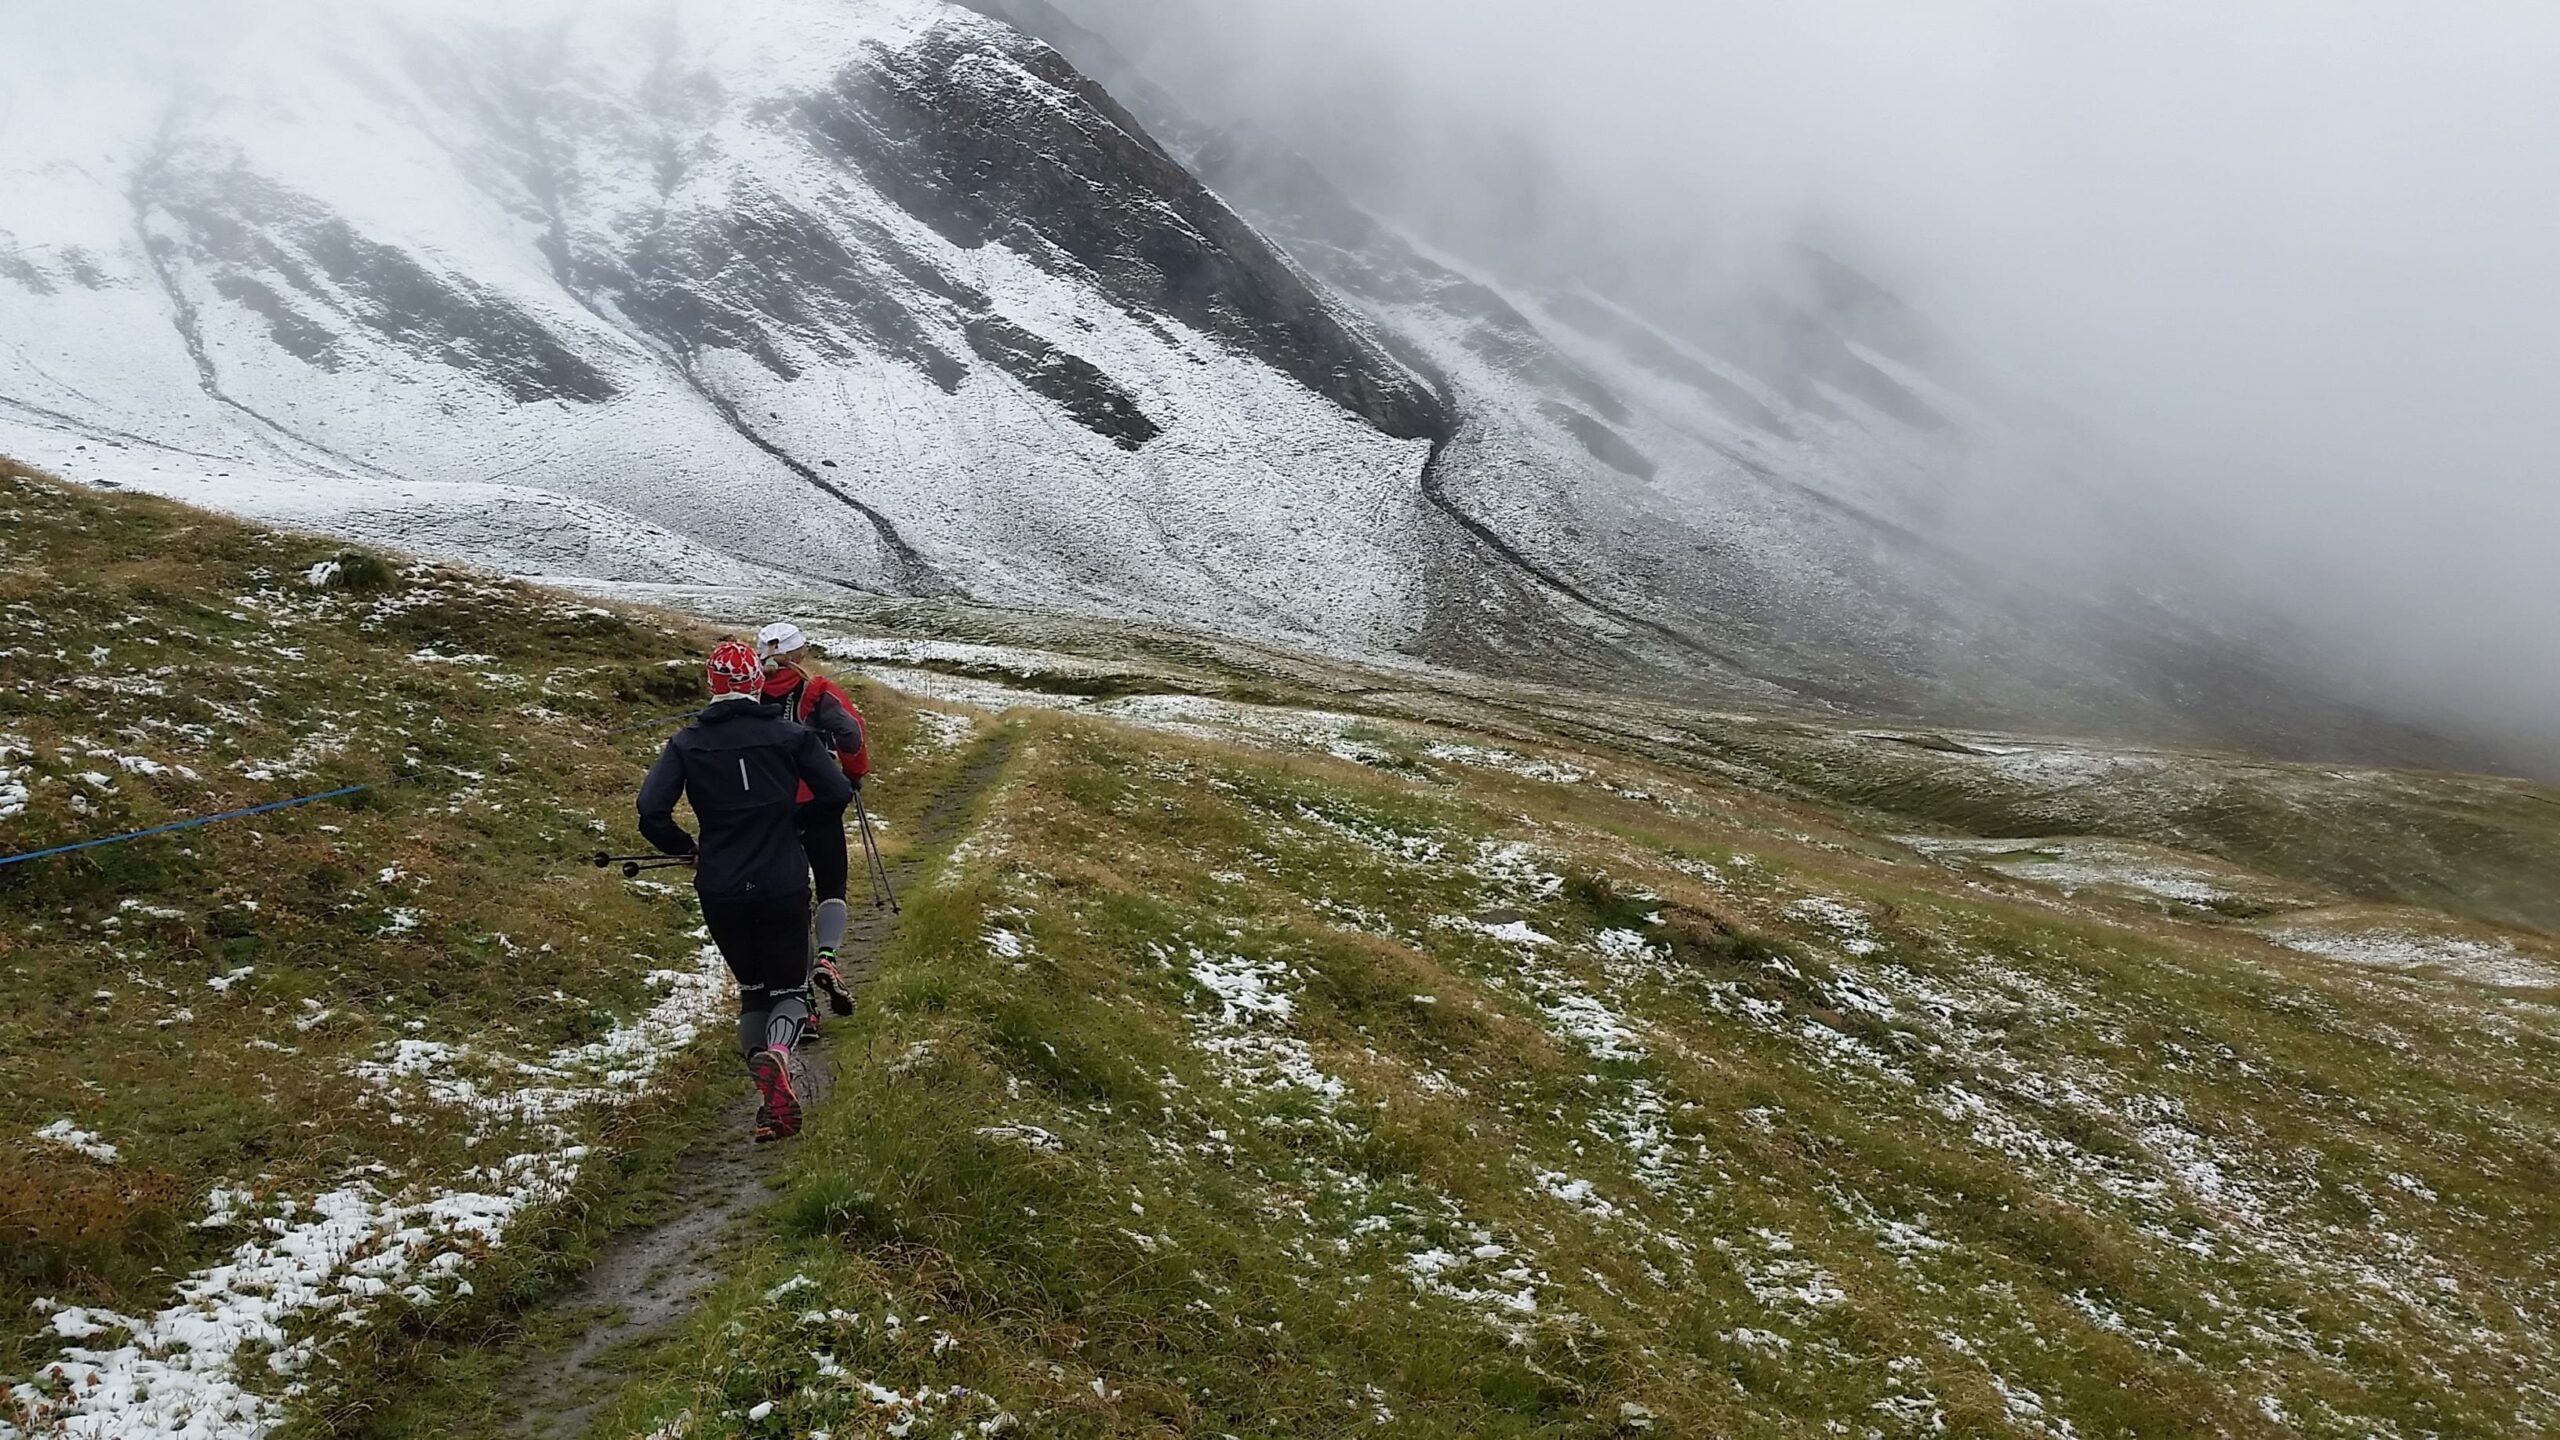 TOR des Geants tratto in discesa con neve e due trail runners 